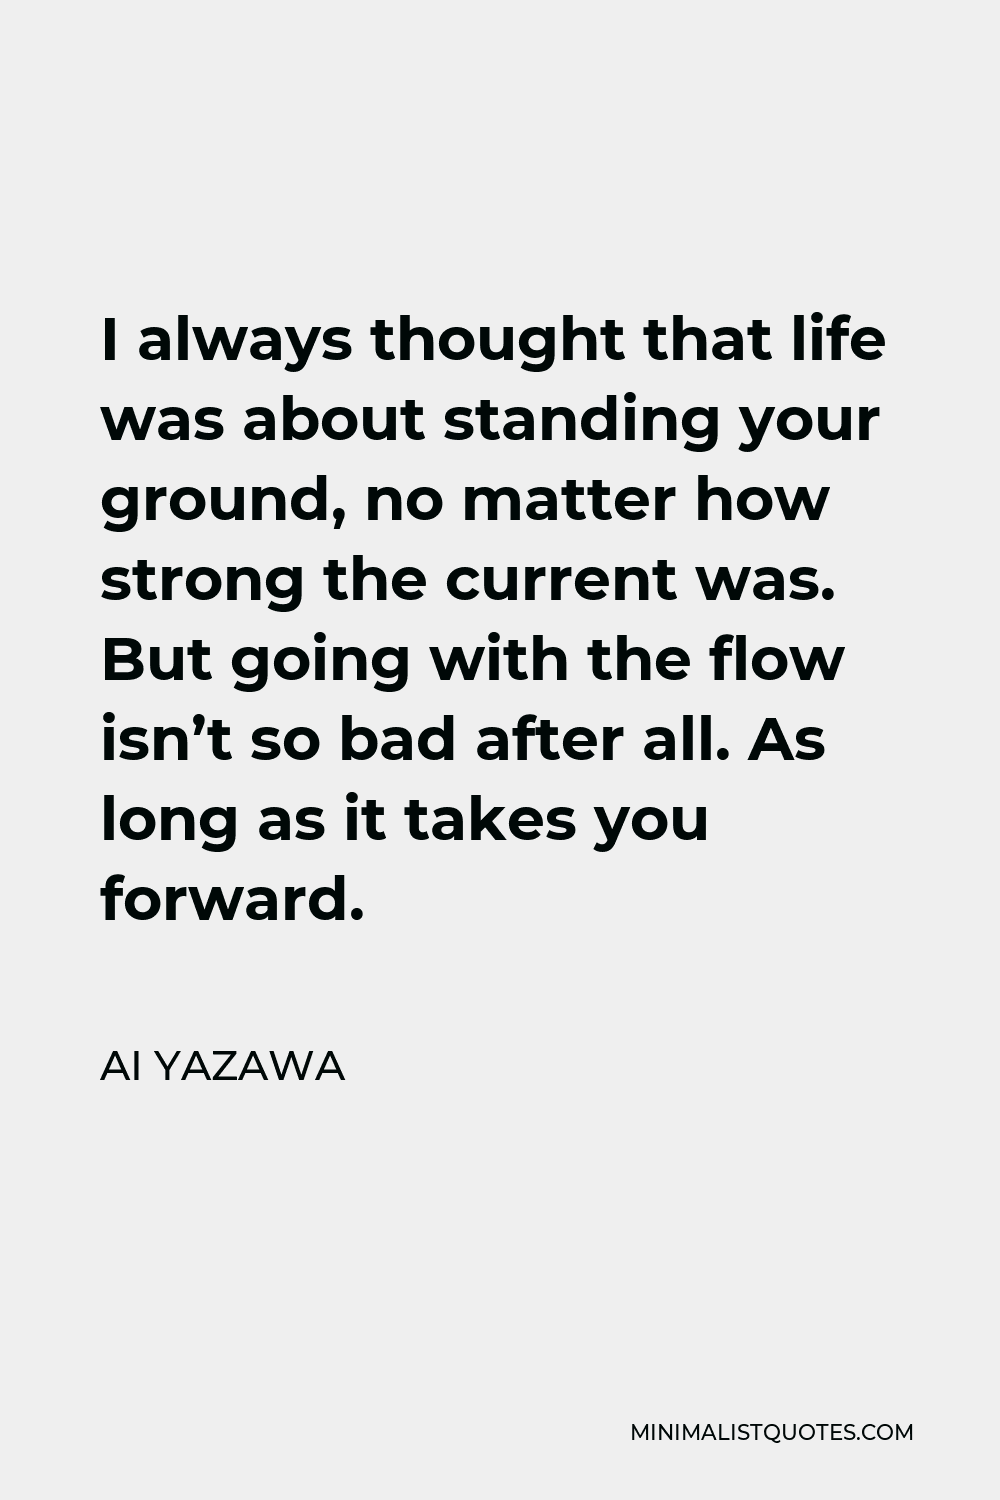 Ai Yazawa Quote - I always thought that life was about standing your ground, no matter how strong the current was. But going with the flow isn’t so bad after all. As long as it takes you forward.